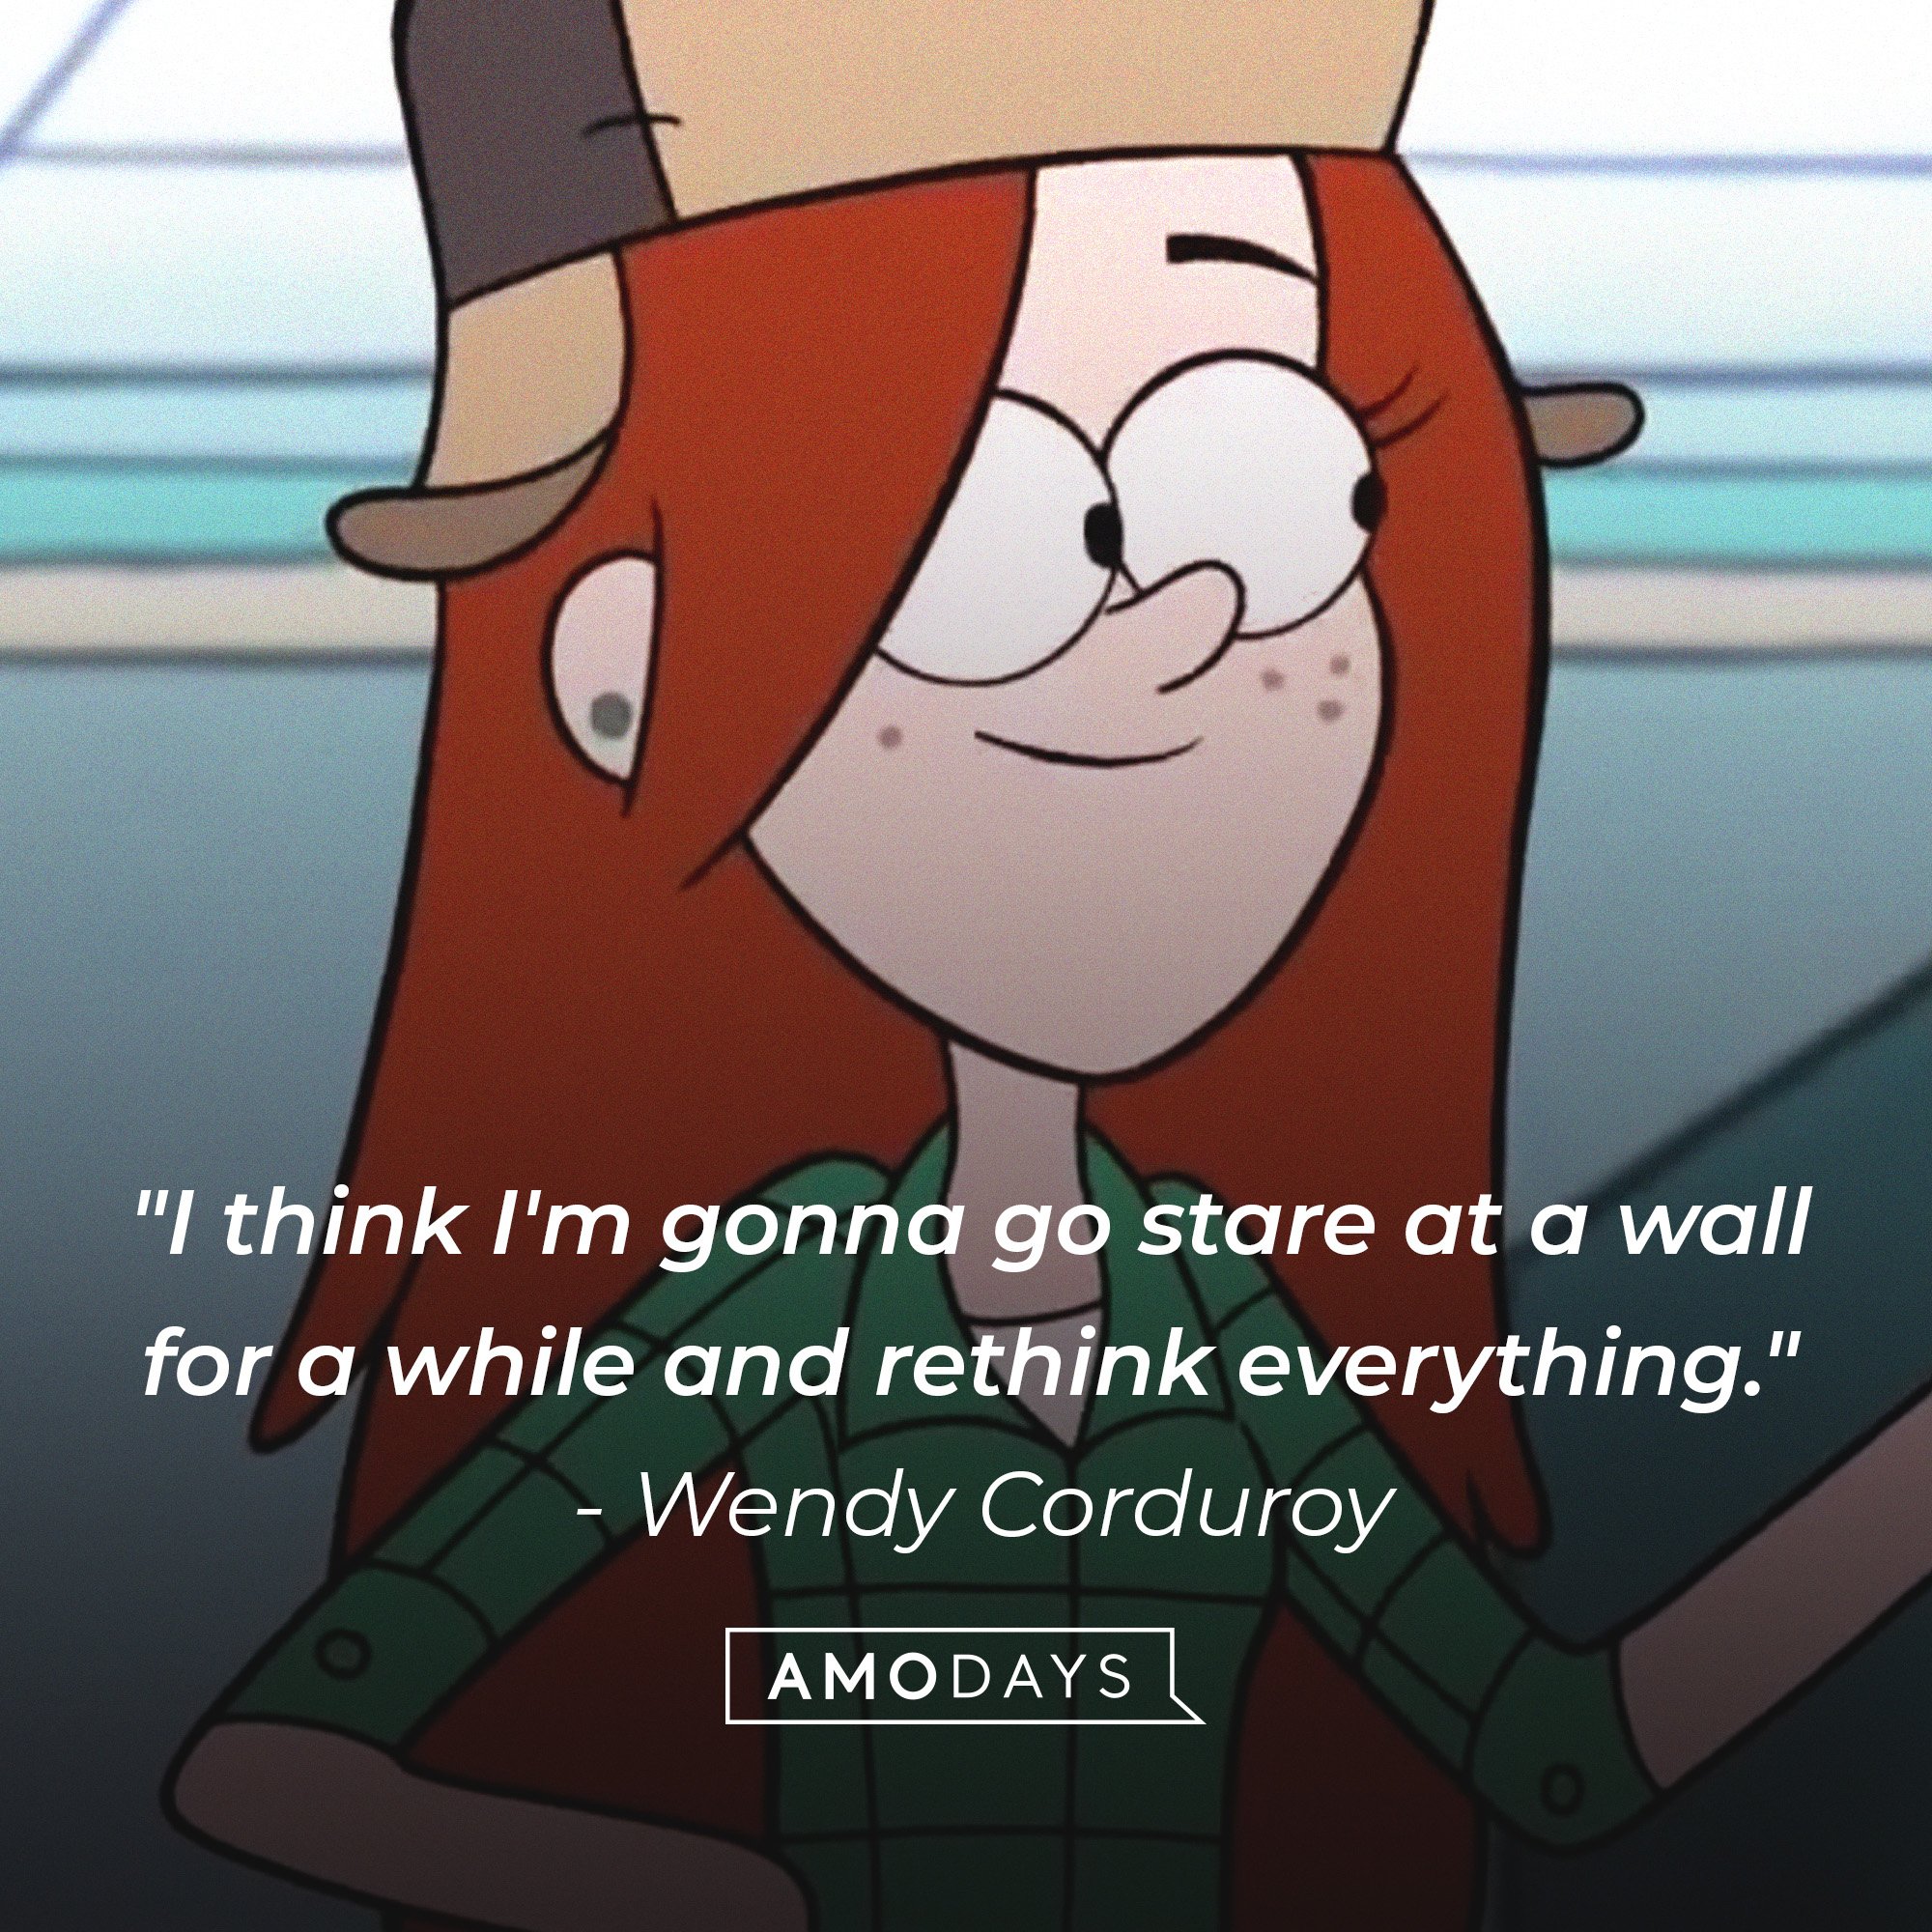 Wendy Corduroy’s quote: "I think I'm gonna go stare at a wall for a while and rethink everything." | Image: AmoDays 